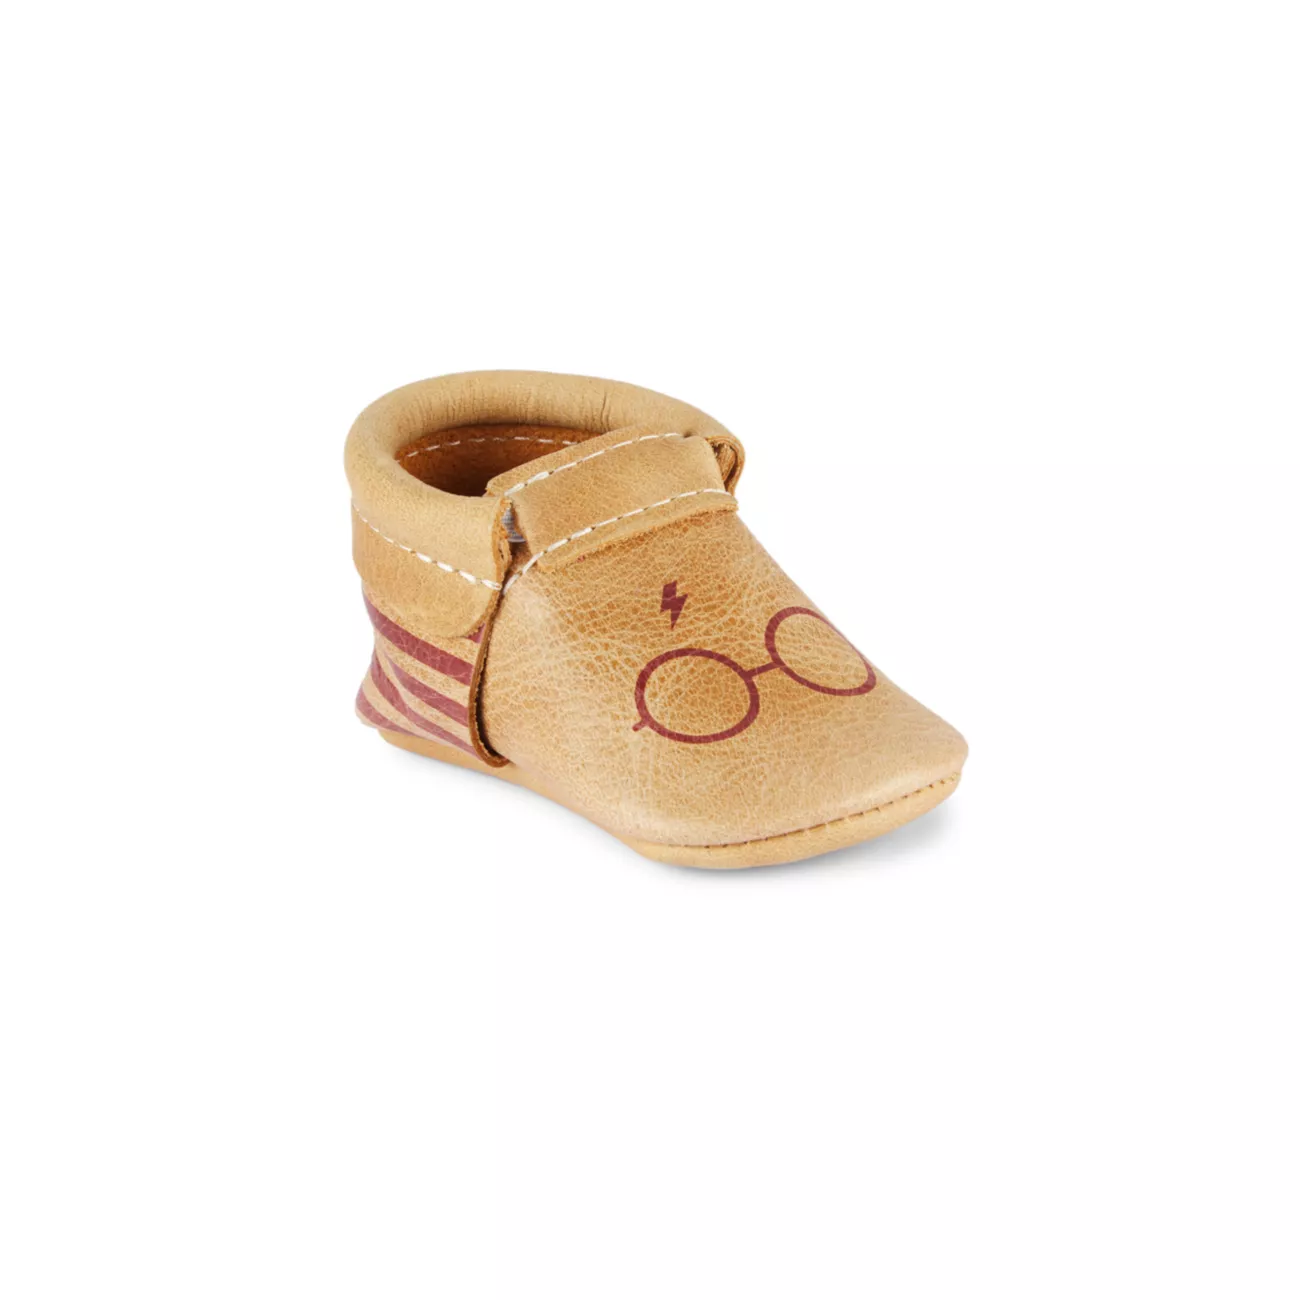 Baby Boy's Harry City Soft Sole Moccasins Freshly Picked